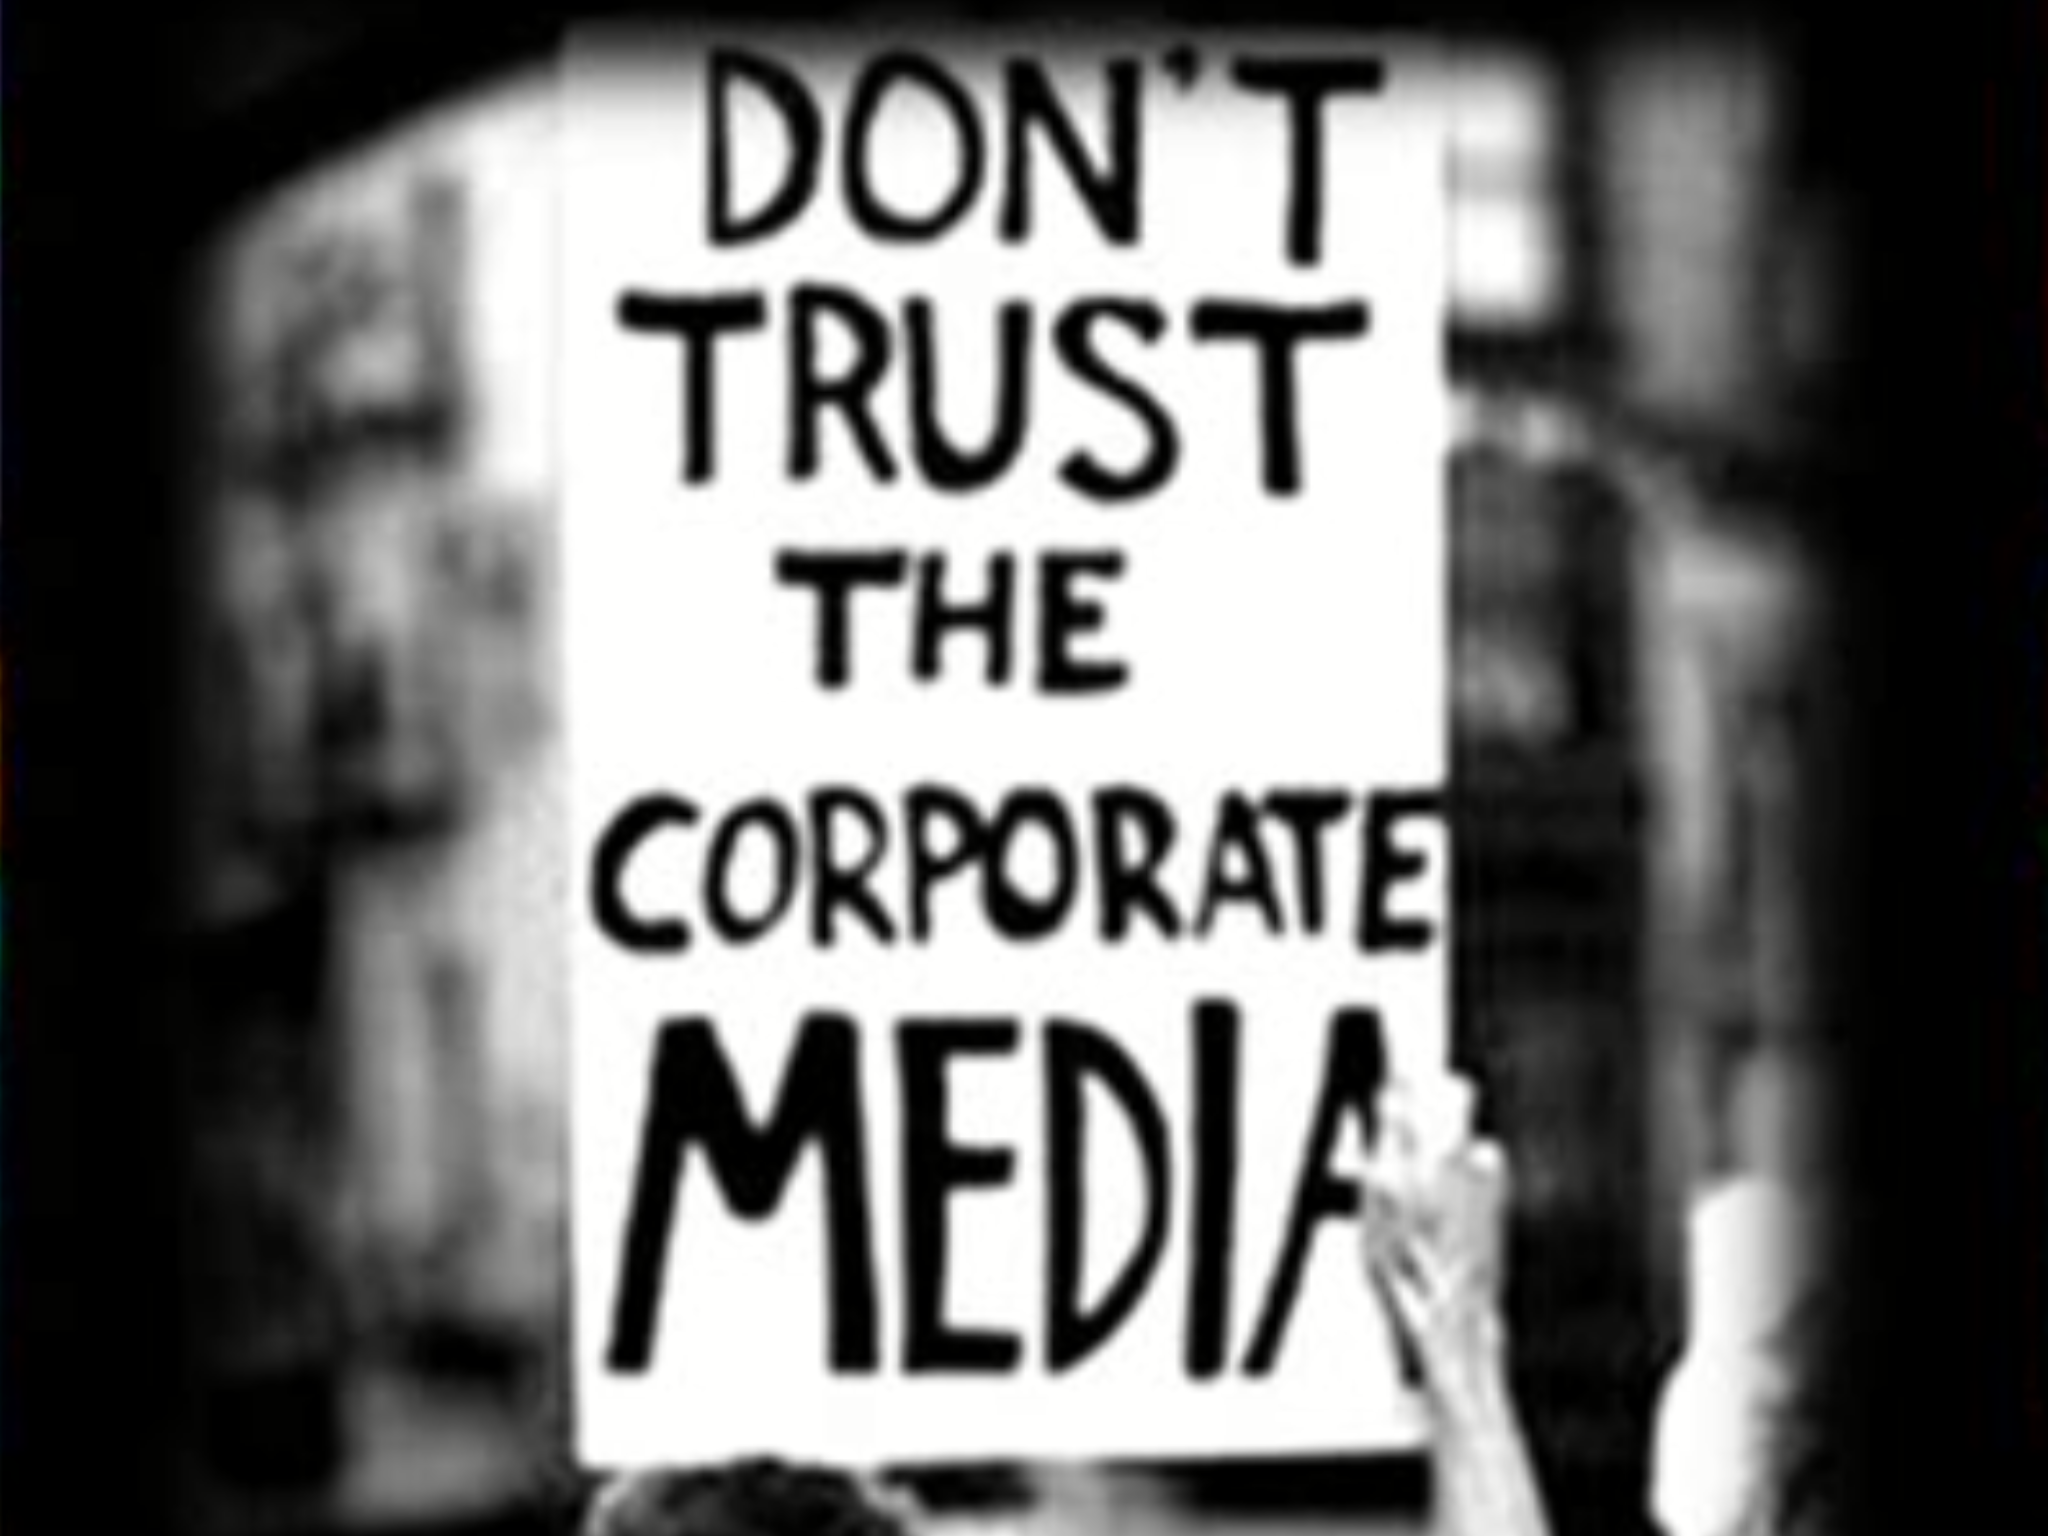 THE MSM IS CONTROLLED BY GREEDY PEOPLE